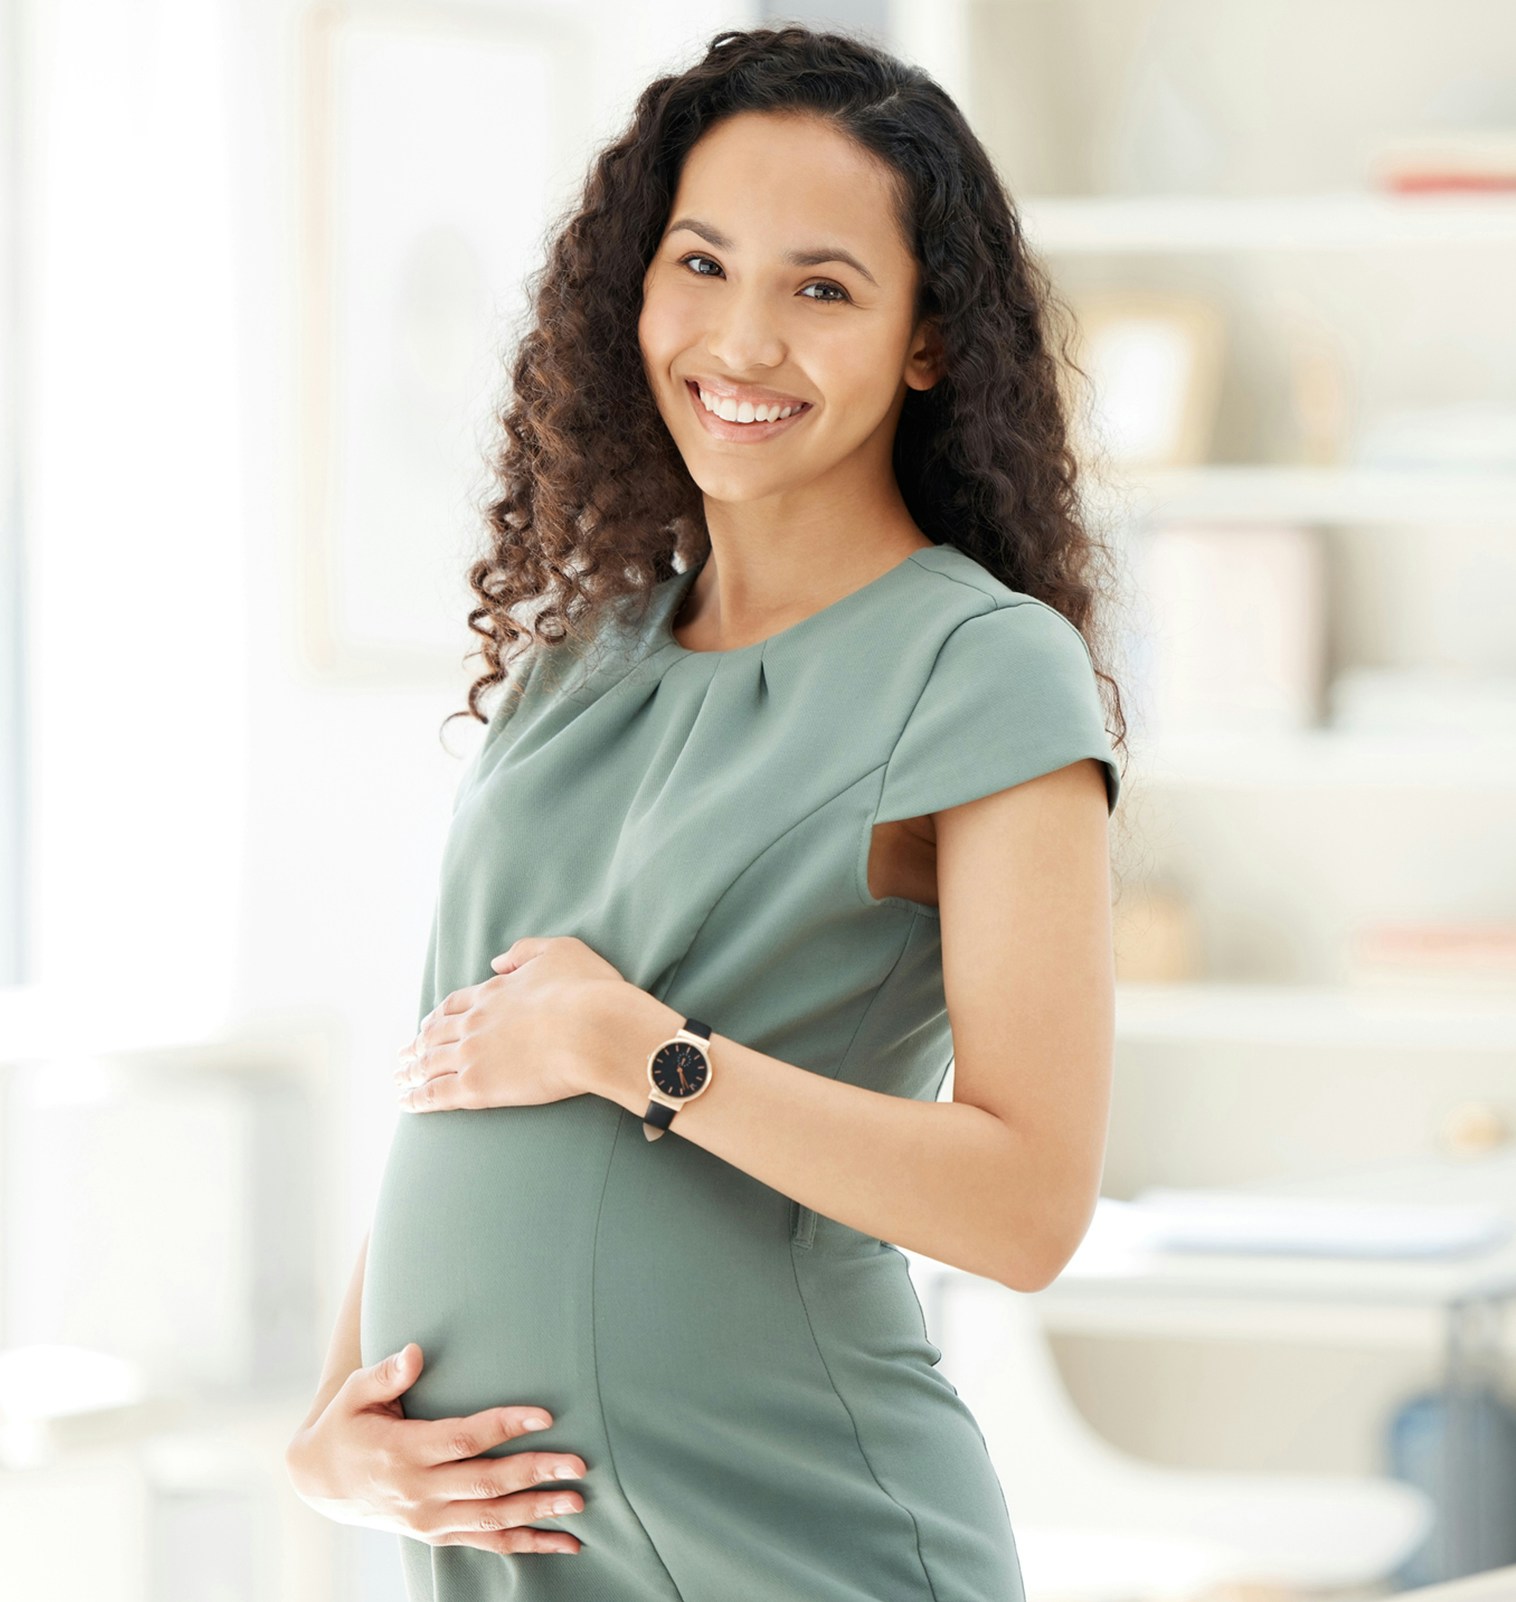 Pregnant woman holding her stomach and smiling